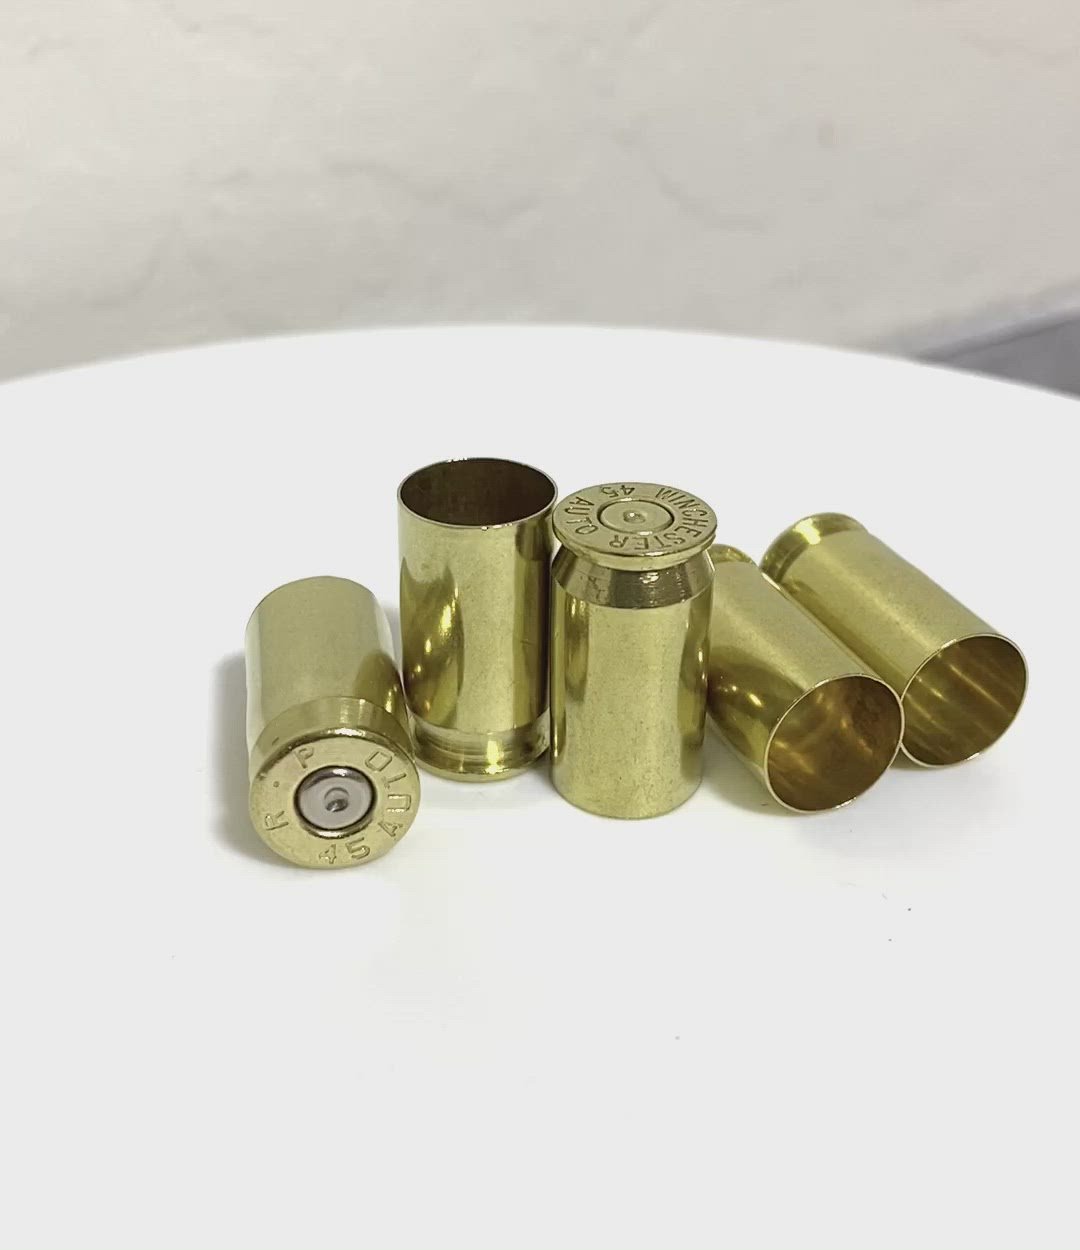 45 ACP Empty Brass Shells Used Spent Bullet Casings Fired Polished –